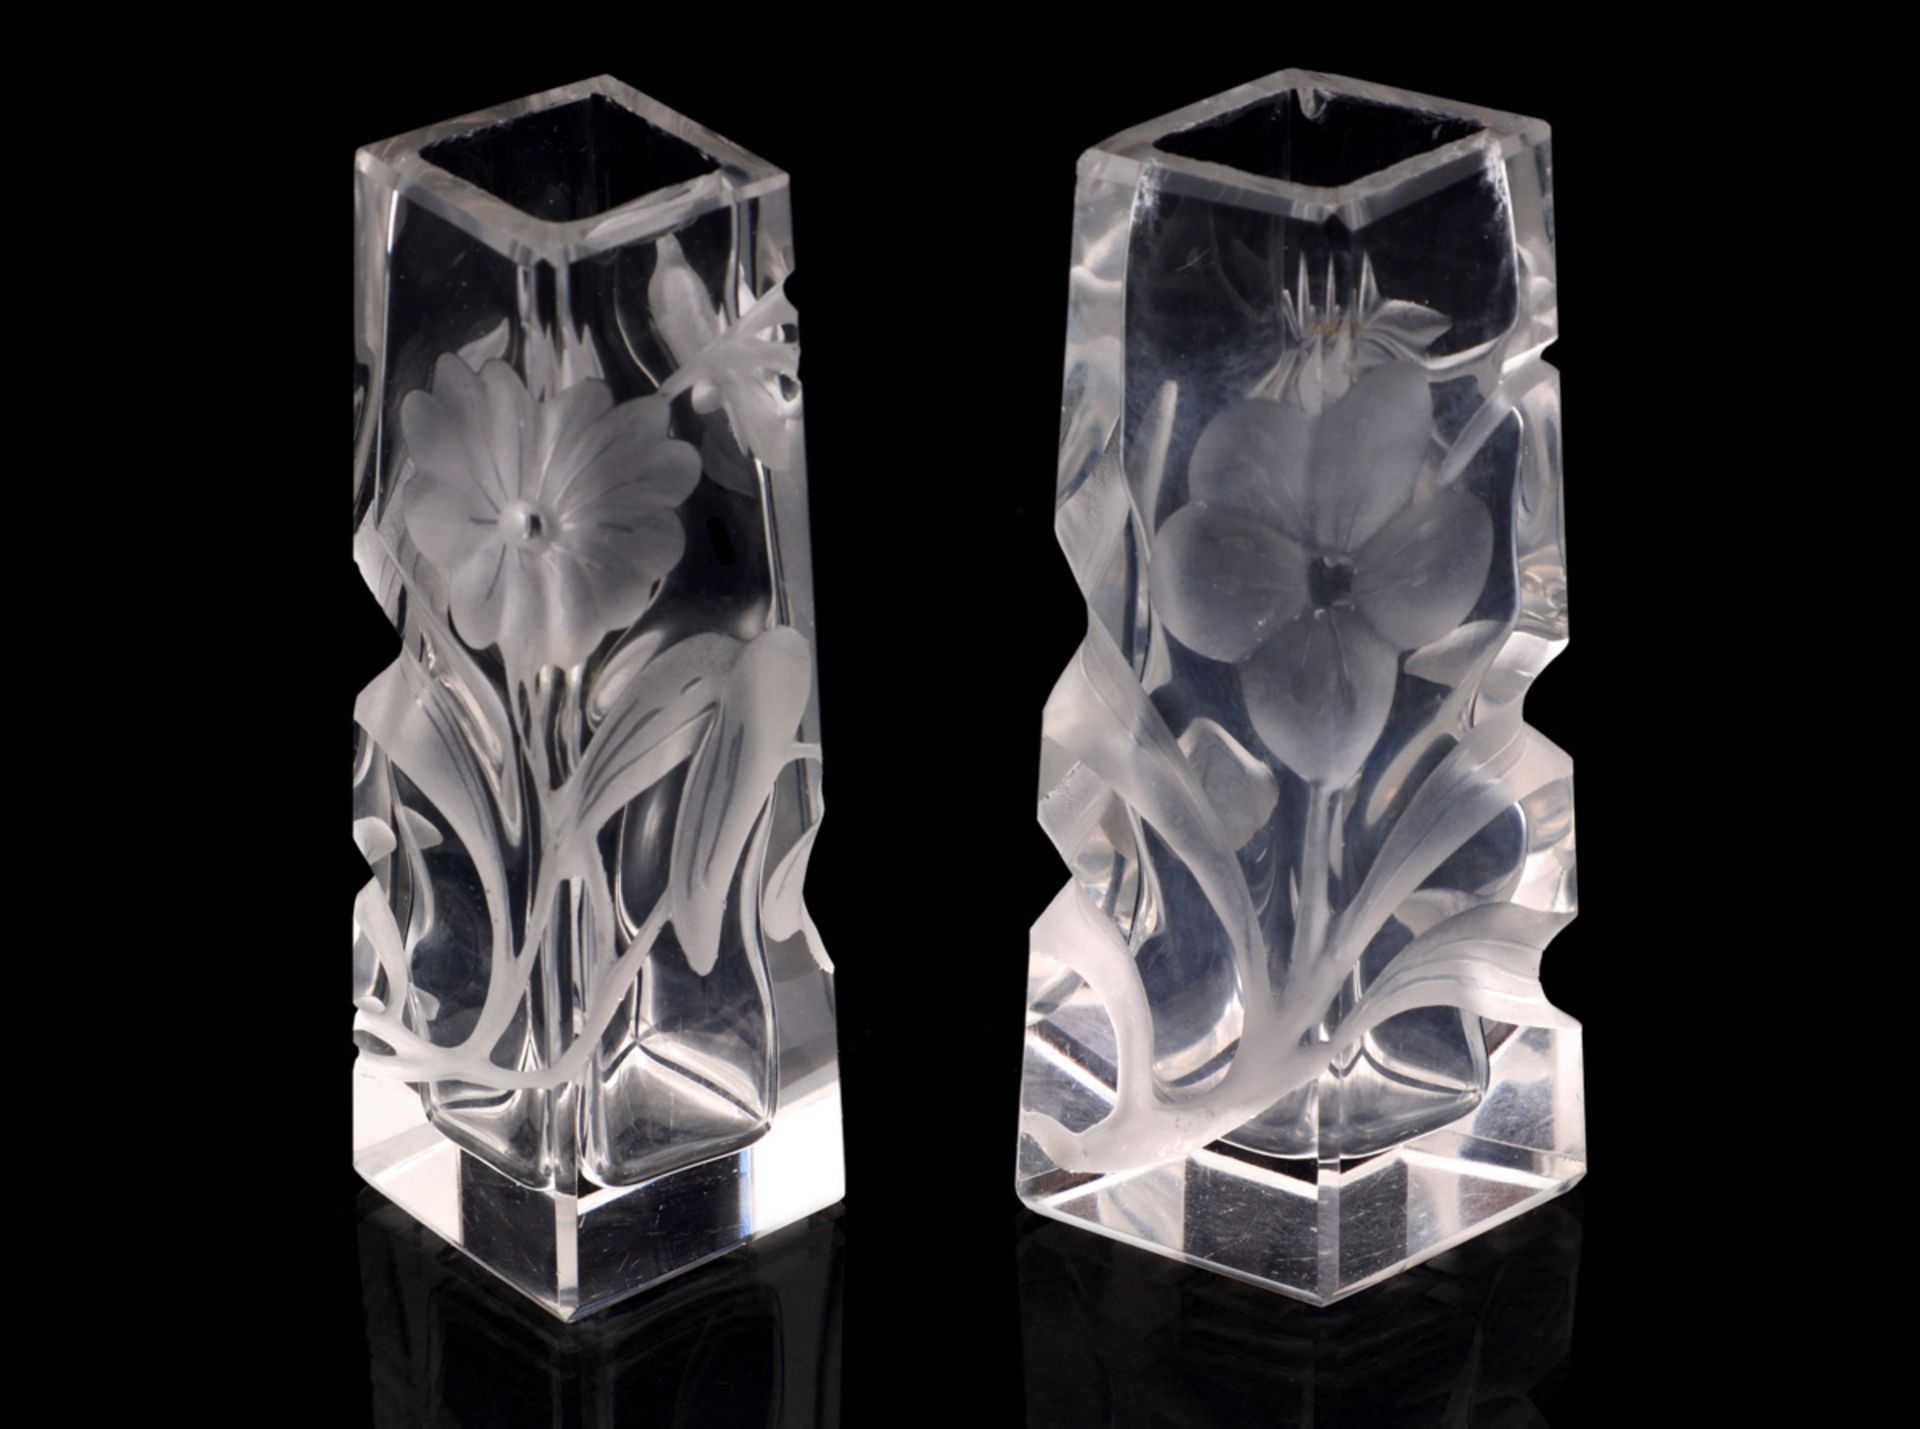 A SMALL PAIR OF MOSER KARLSBAD VASES Moser Karlsbad glass, engraved decoration with flowers. Czech